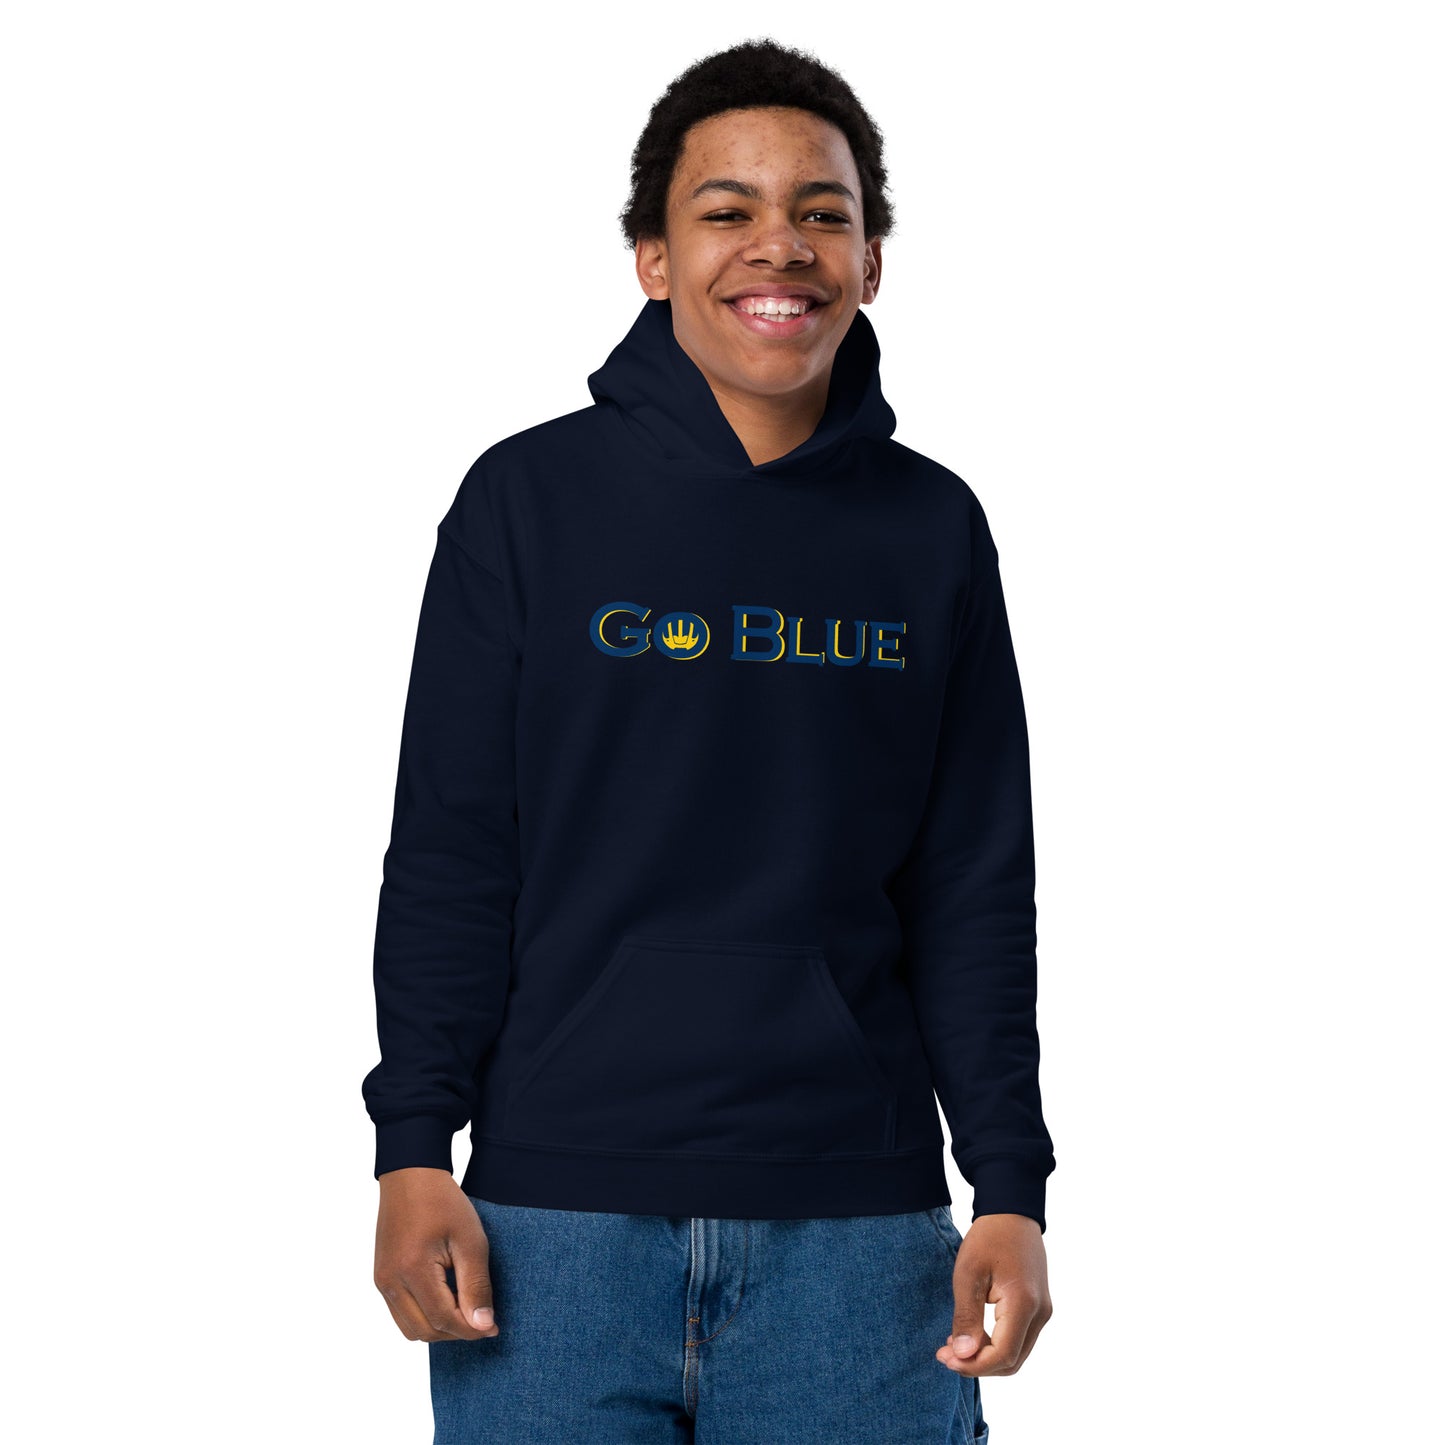 Go Blue Youth heavy blend hoodie